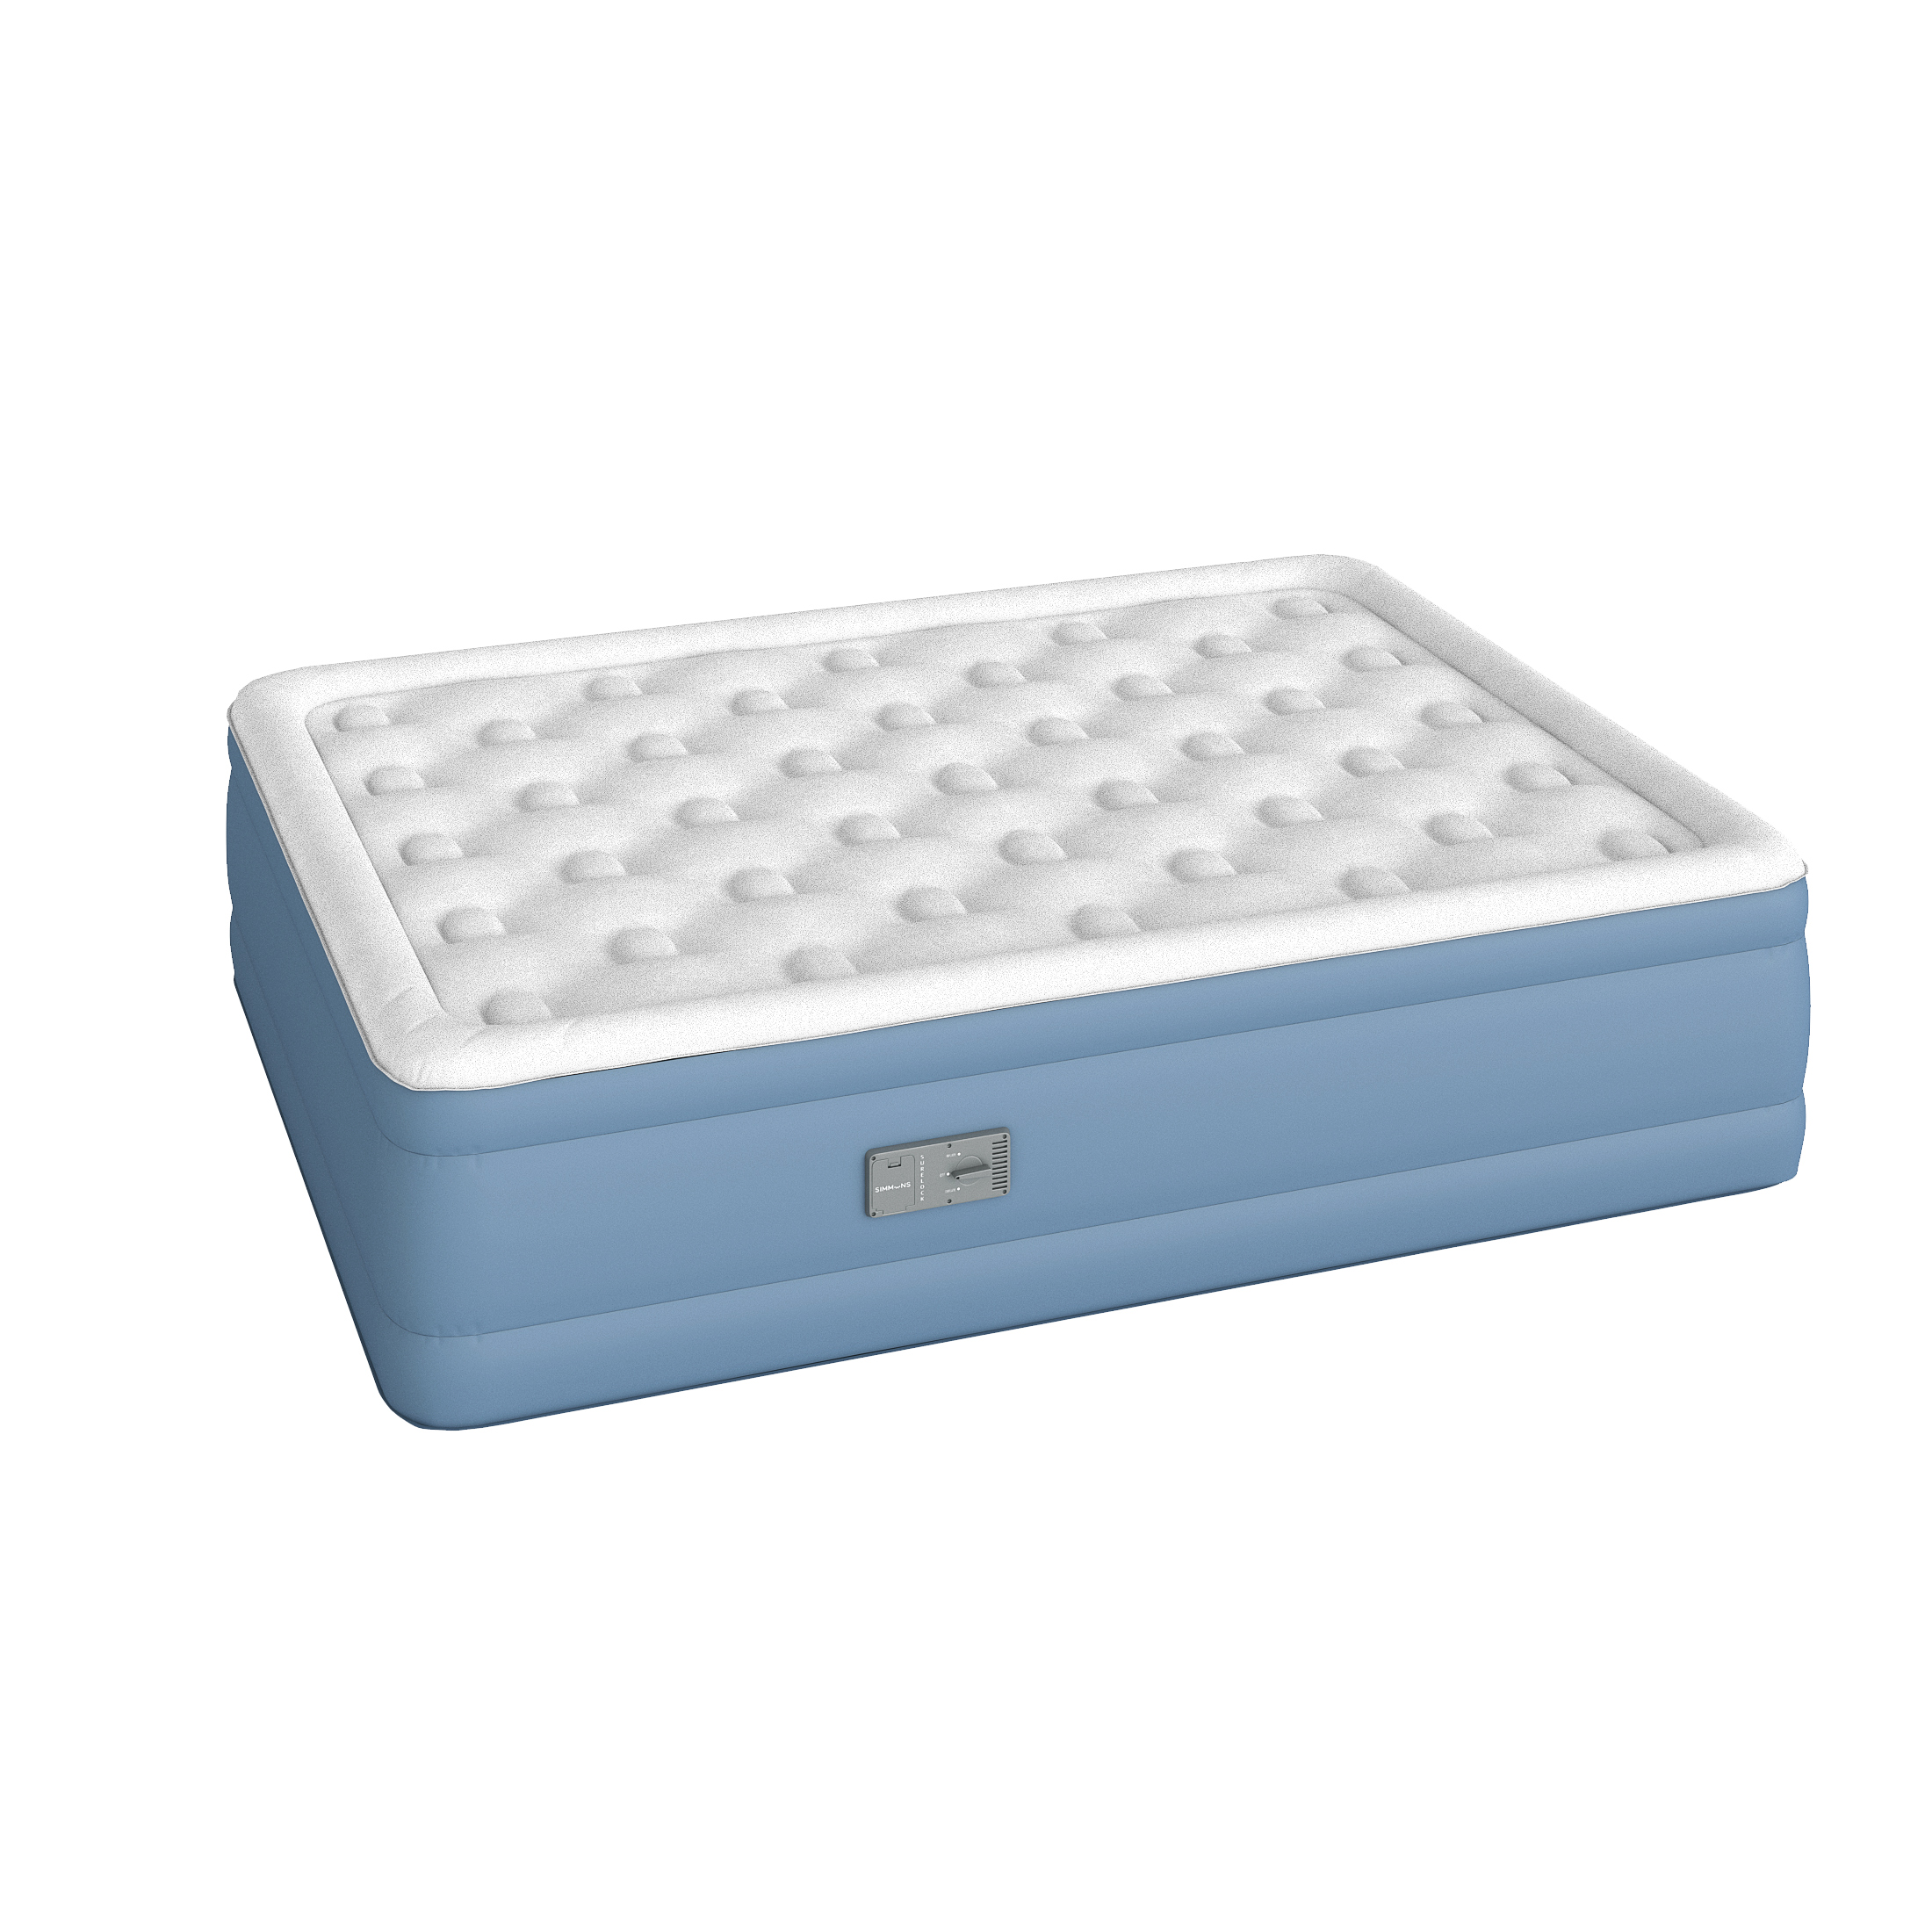 SHINECRAVE Automatic Inflatable Mattress Bed